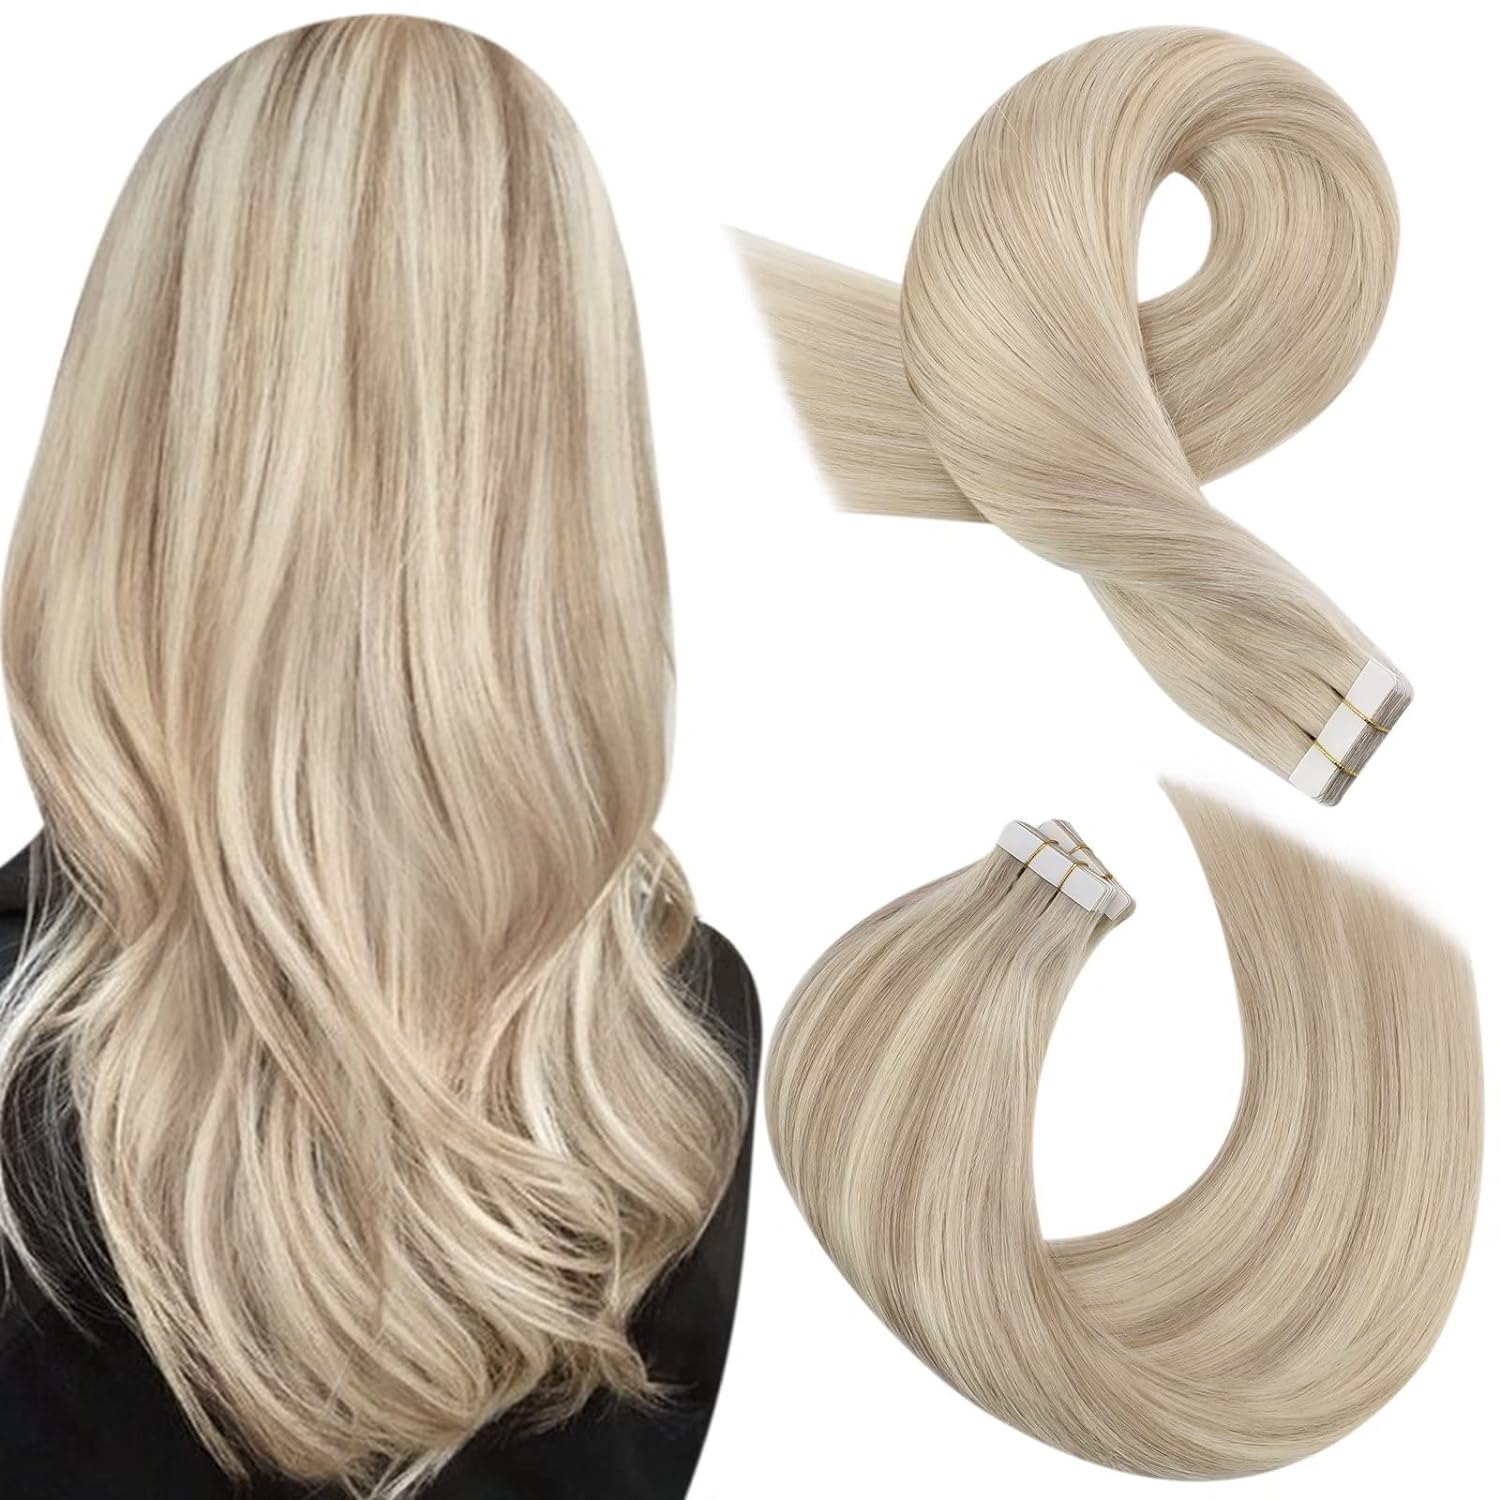 Tape in Human Hair Extensions Blonde Highlighted Tape in Extensions Real Hair Invisible Hair Extensions Ash Blonde Mix with Bleach Blonde Hair. Color:# 18P613